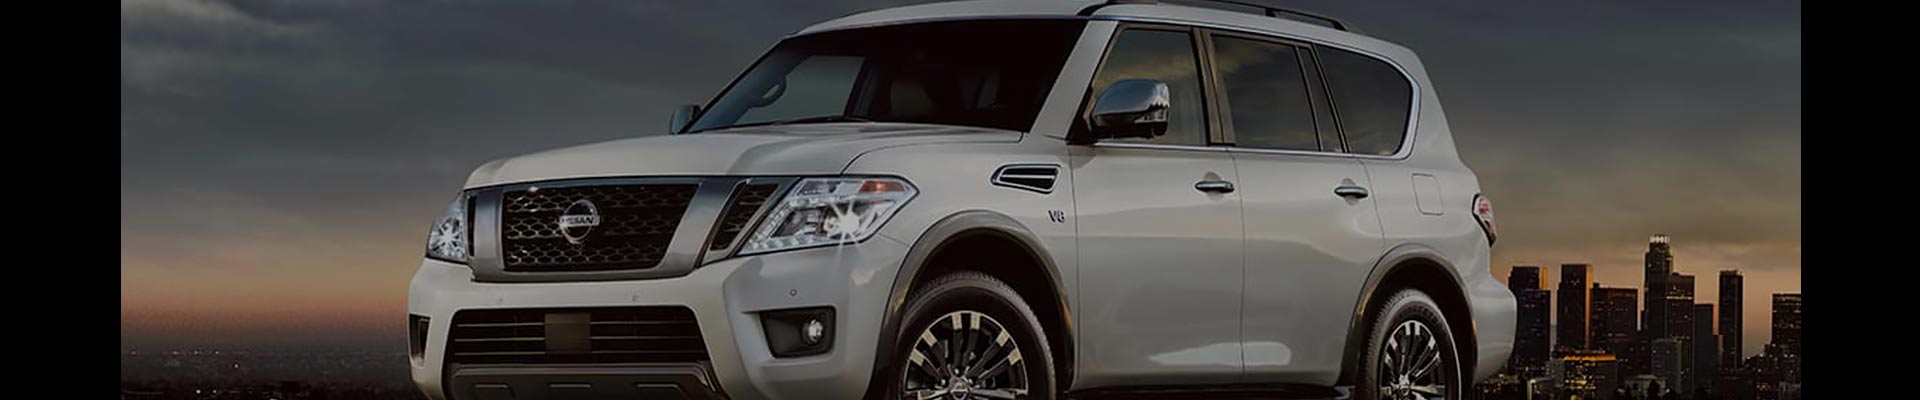 Shop Replacement and OEM 2010 Nissan Armada Parts with Discounted Price on the Net